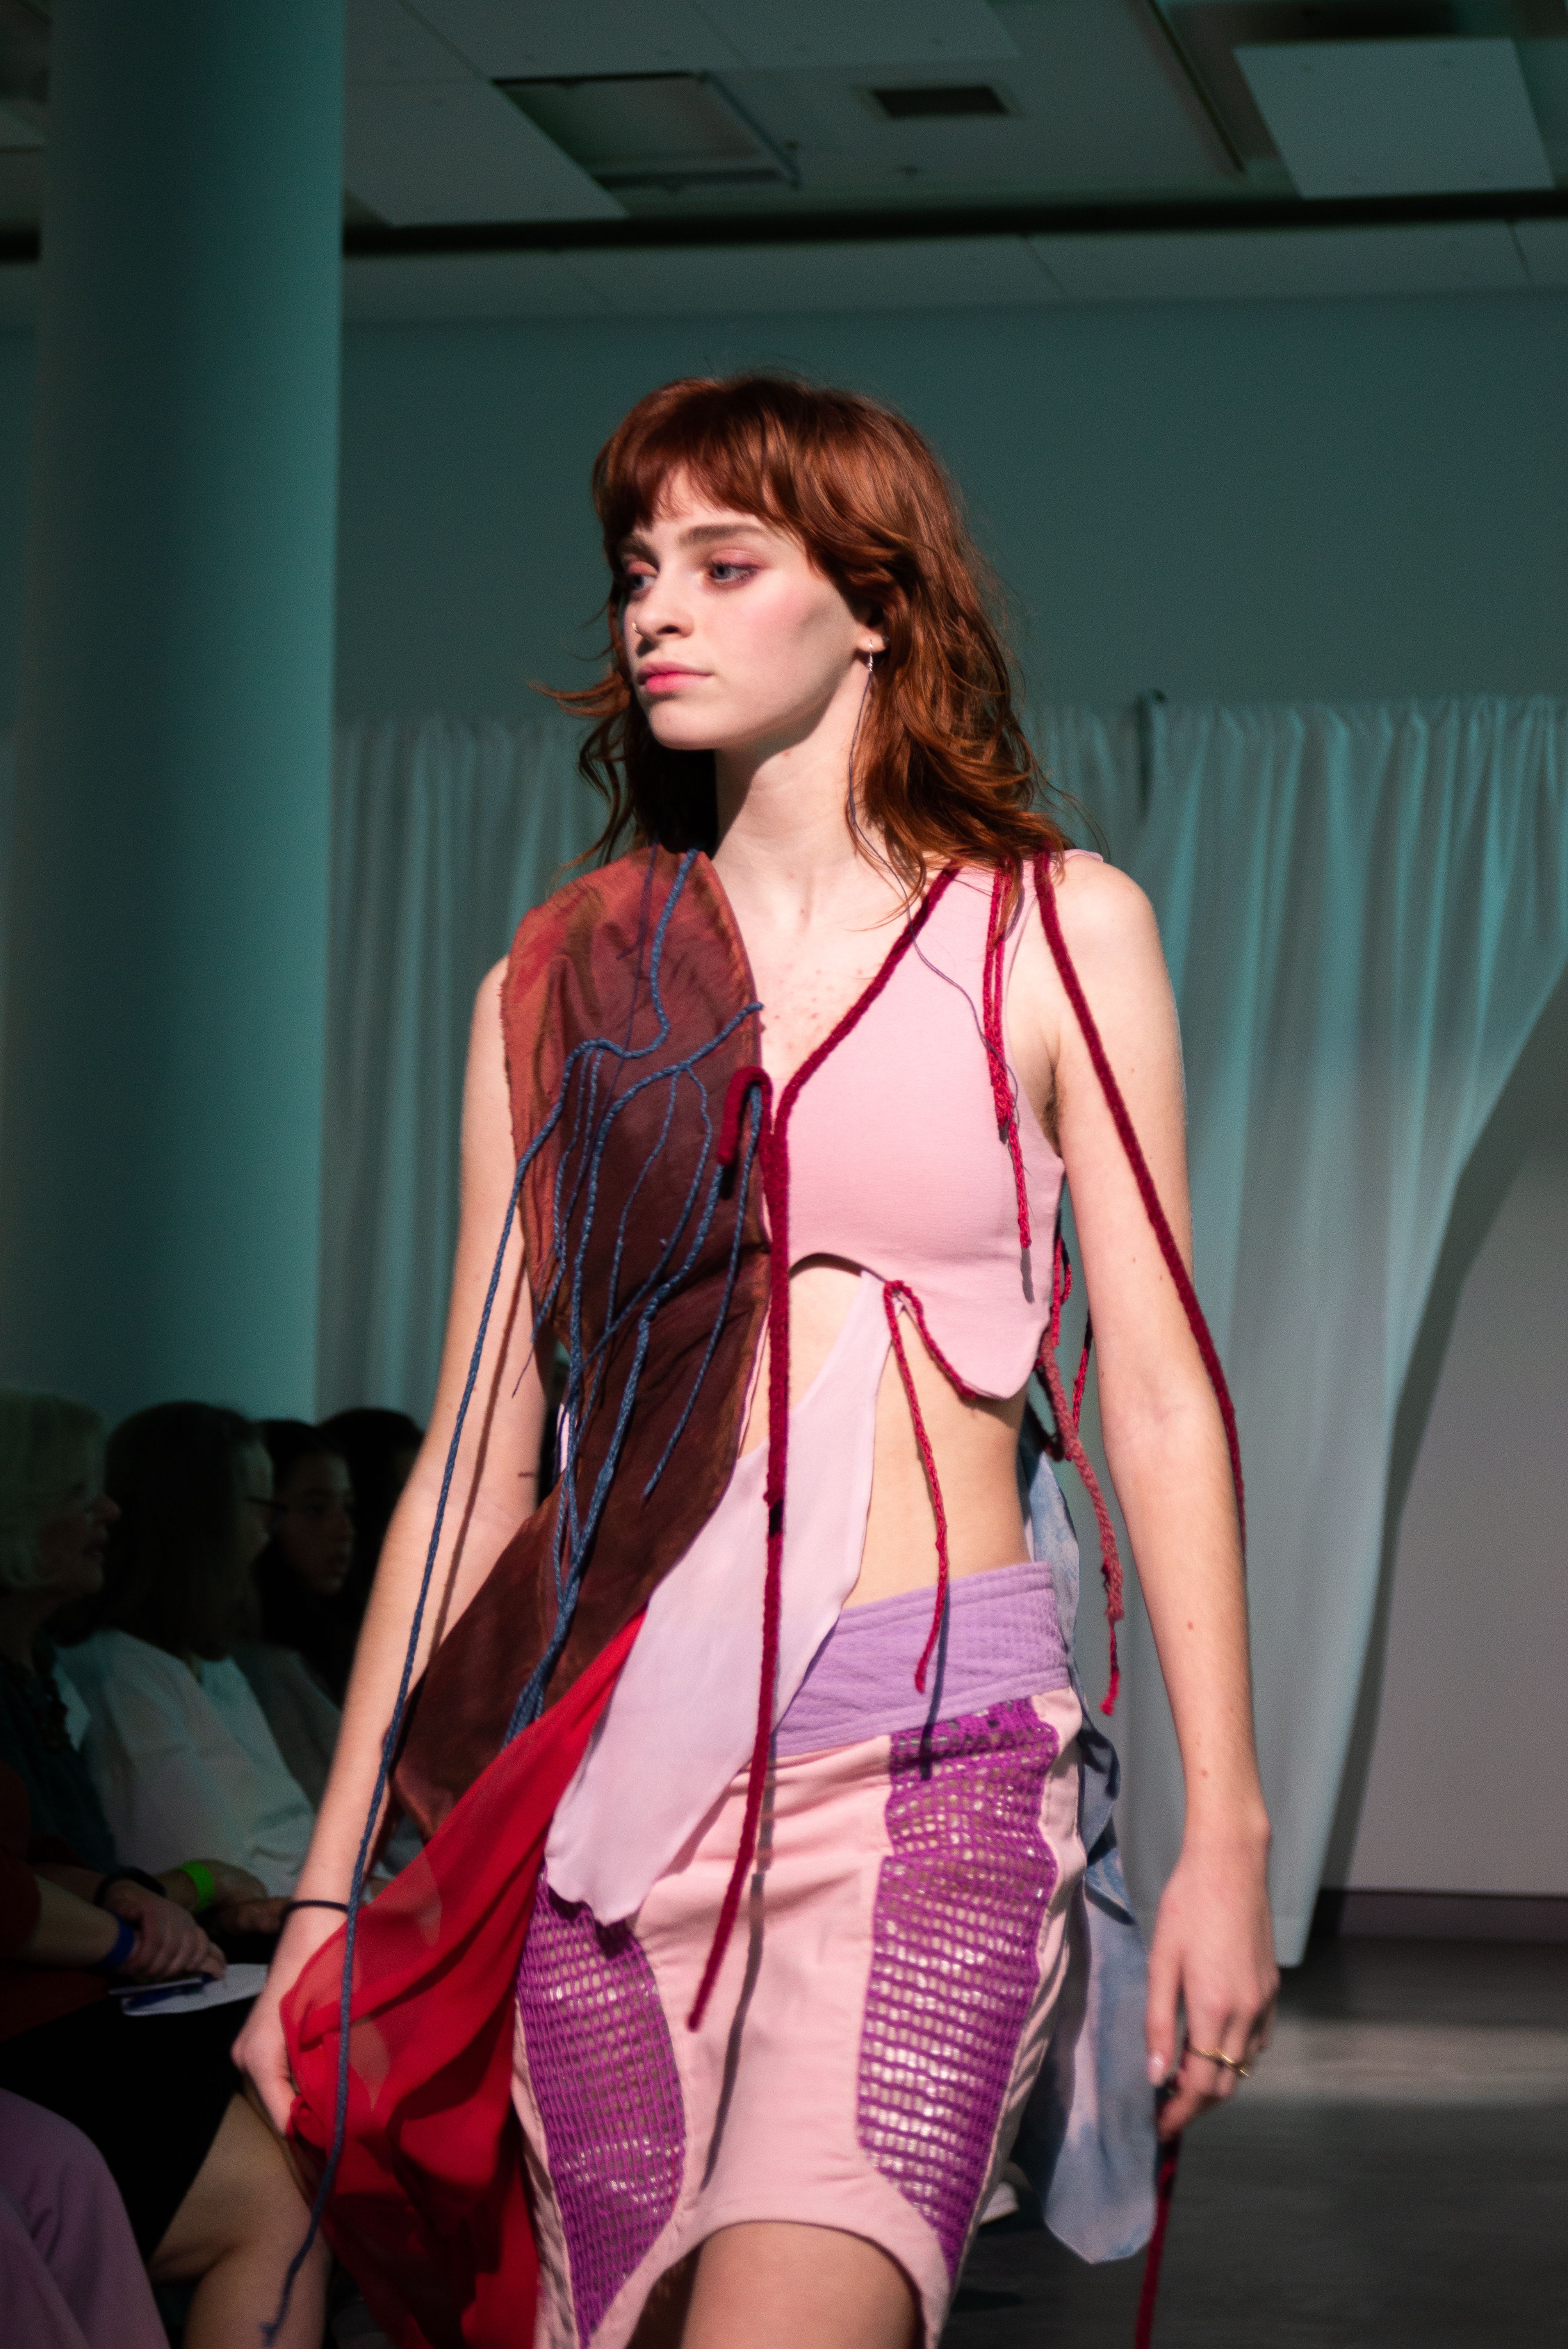 A model on the runway wearing an asymmetrical dress with dangling flesh-colored fabrics.